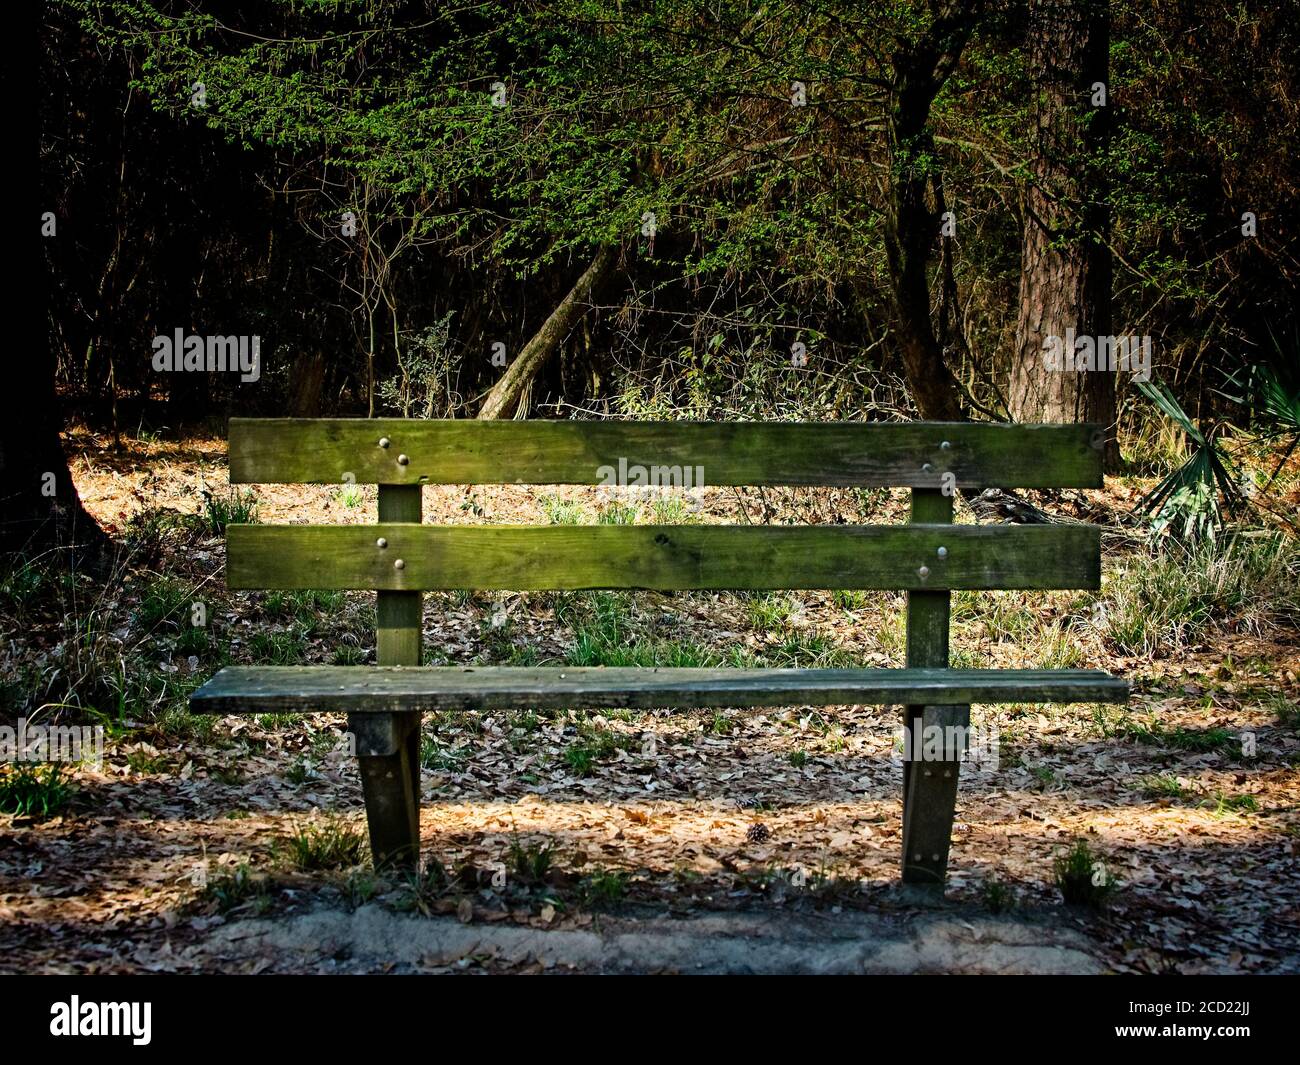 The Woodlands TX USA - 02-28-2020 - Alte Holzbank In Woods 2 Stockfoto